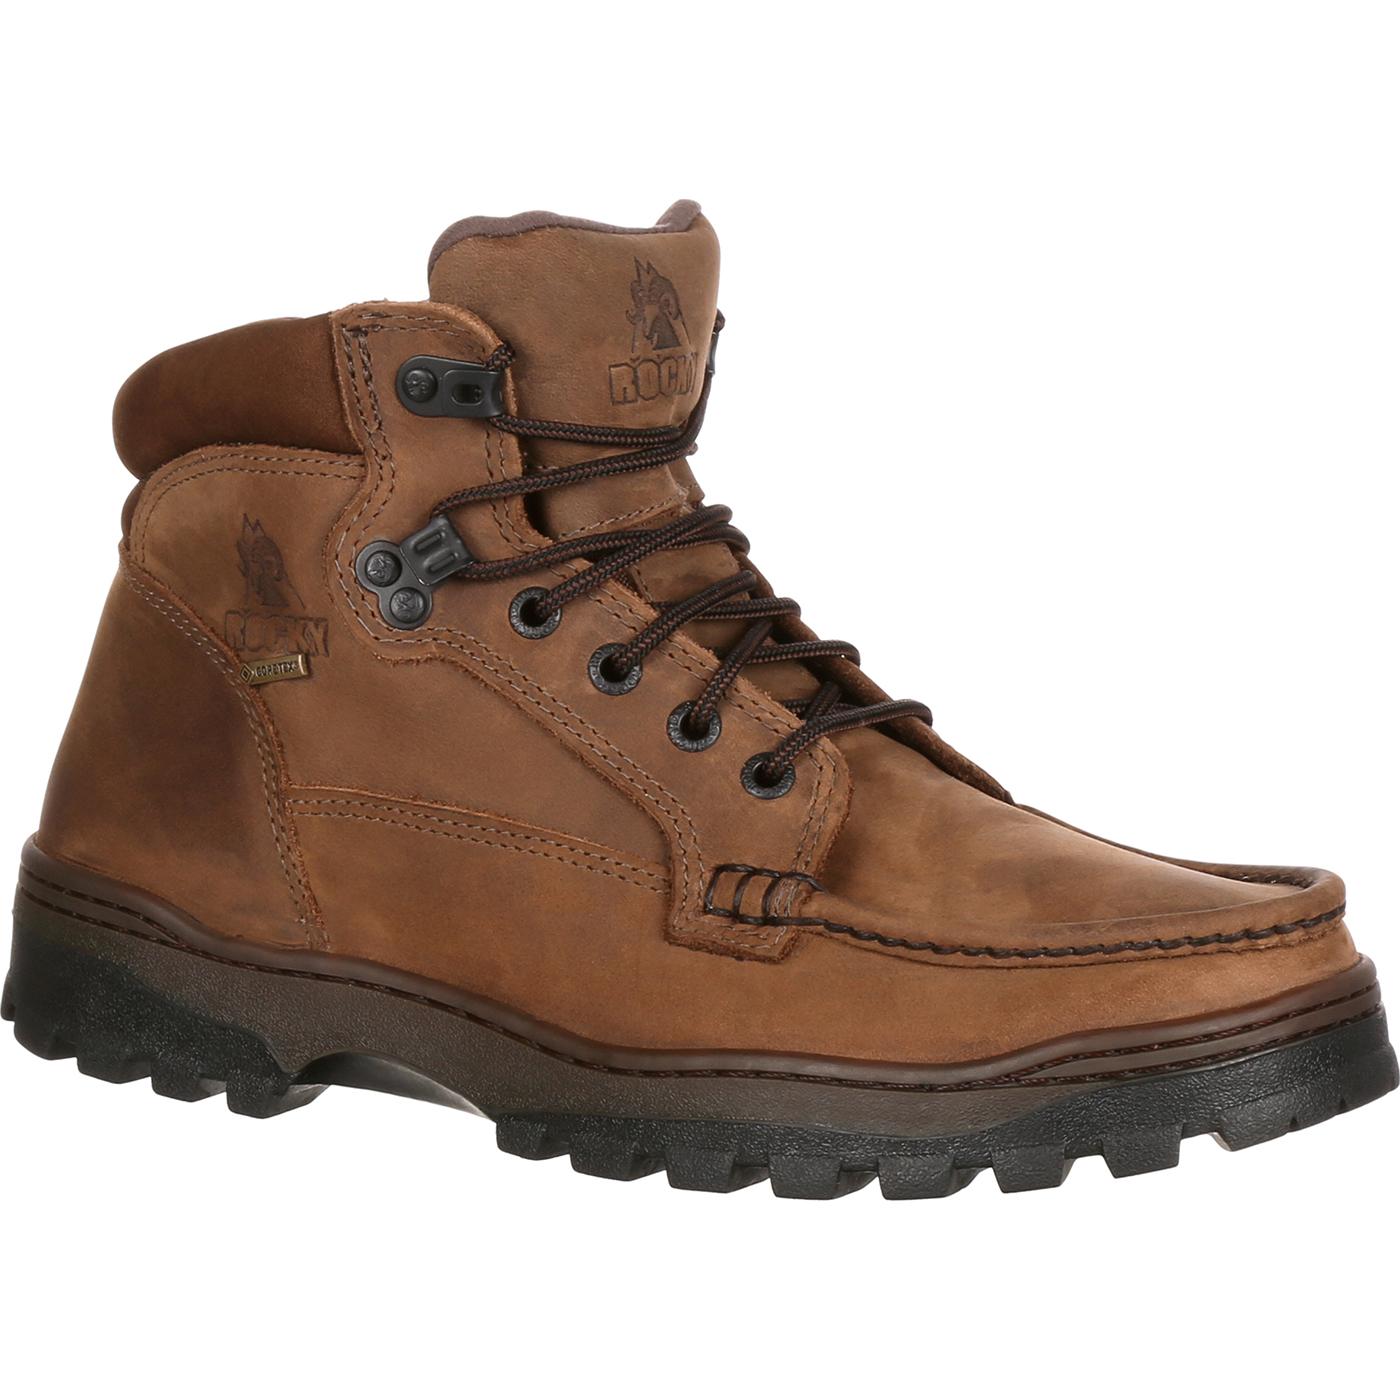 Rocky Outback GORE-TEX® Waterproof Field Boots - Style #8723